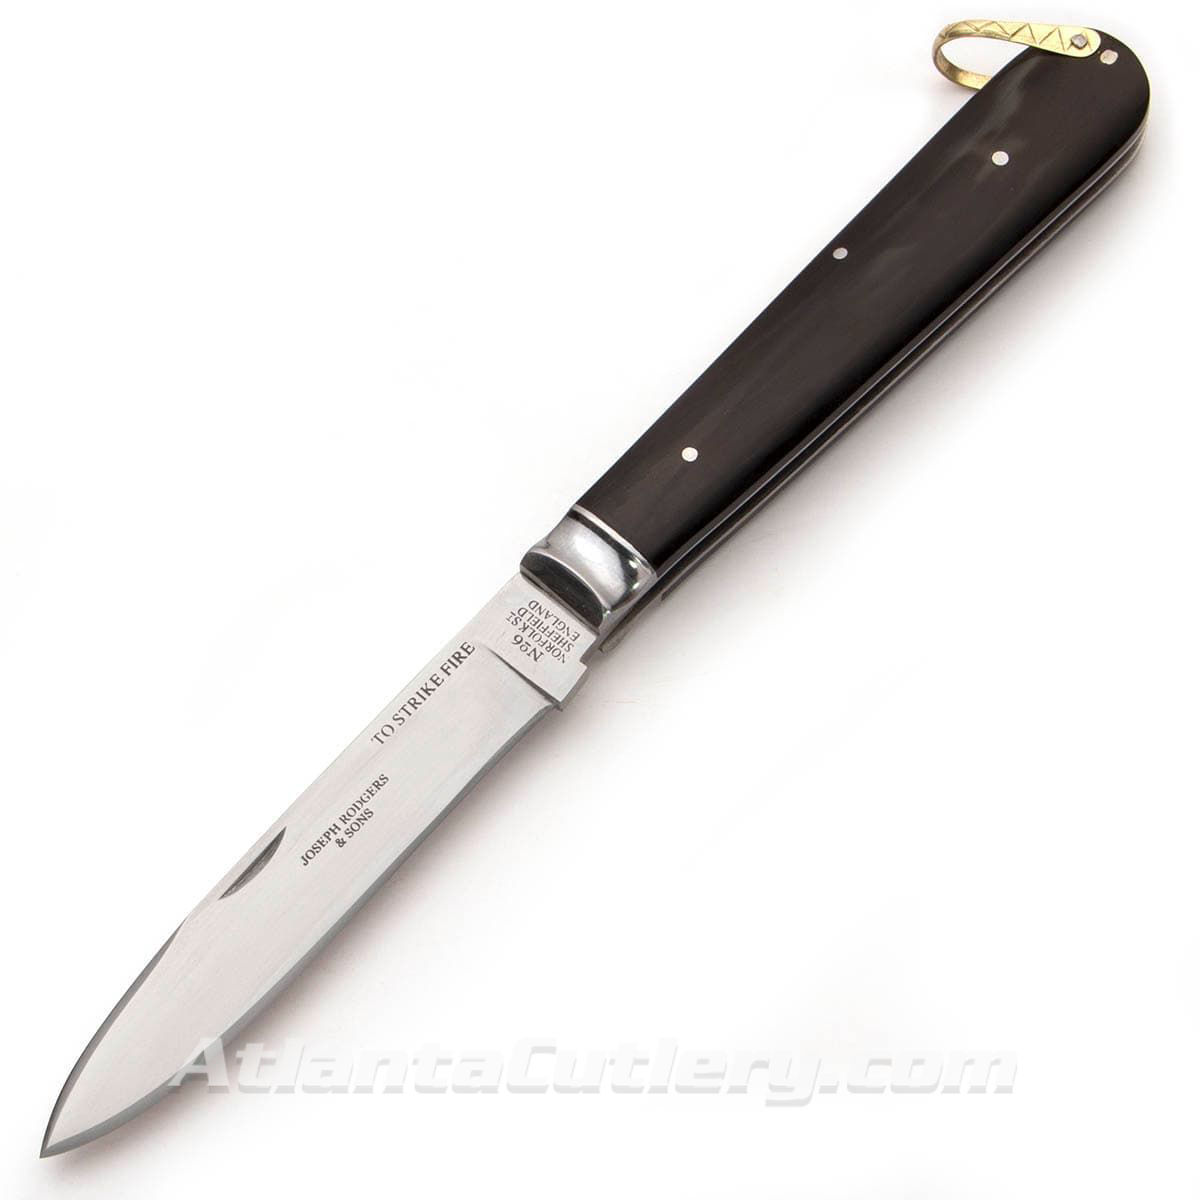 Reproduction Joseph Rodgers & Sons #6 Spear Point Folder with Polished Buffalo Horn Scales and Carbon Steel Blade